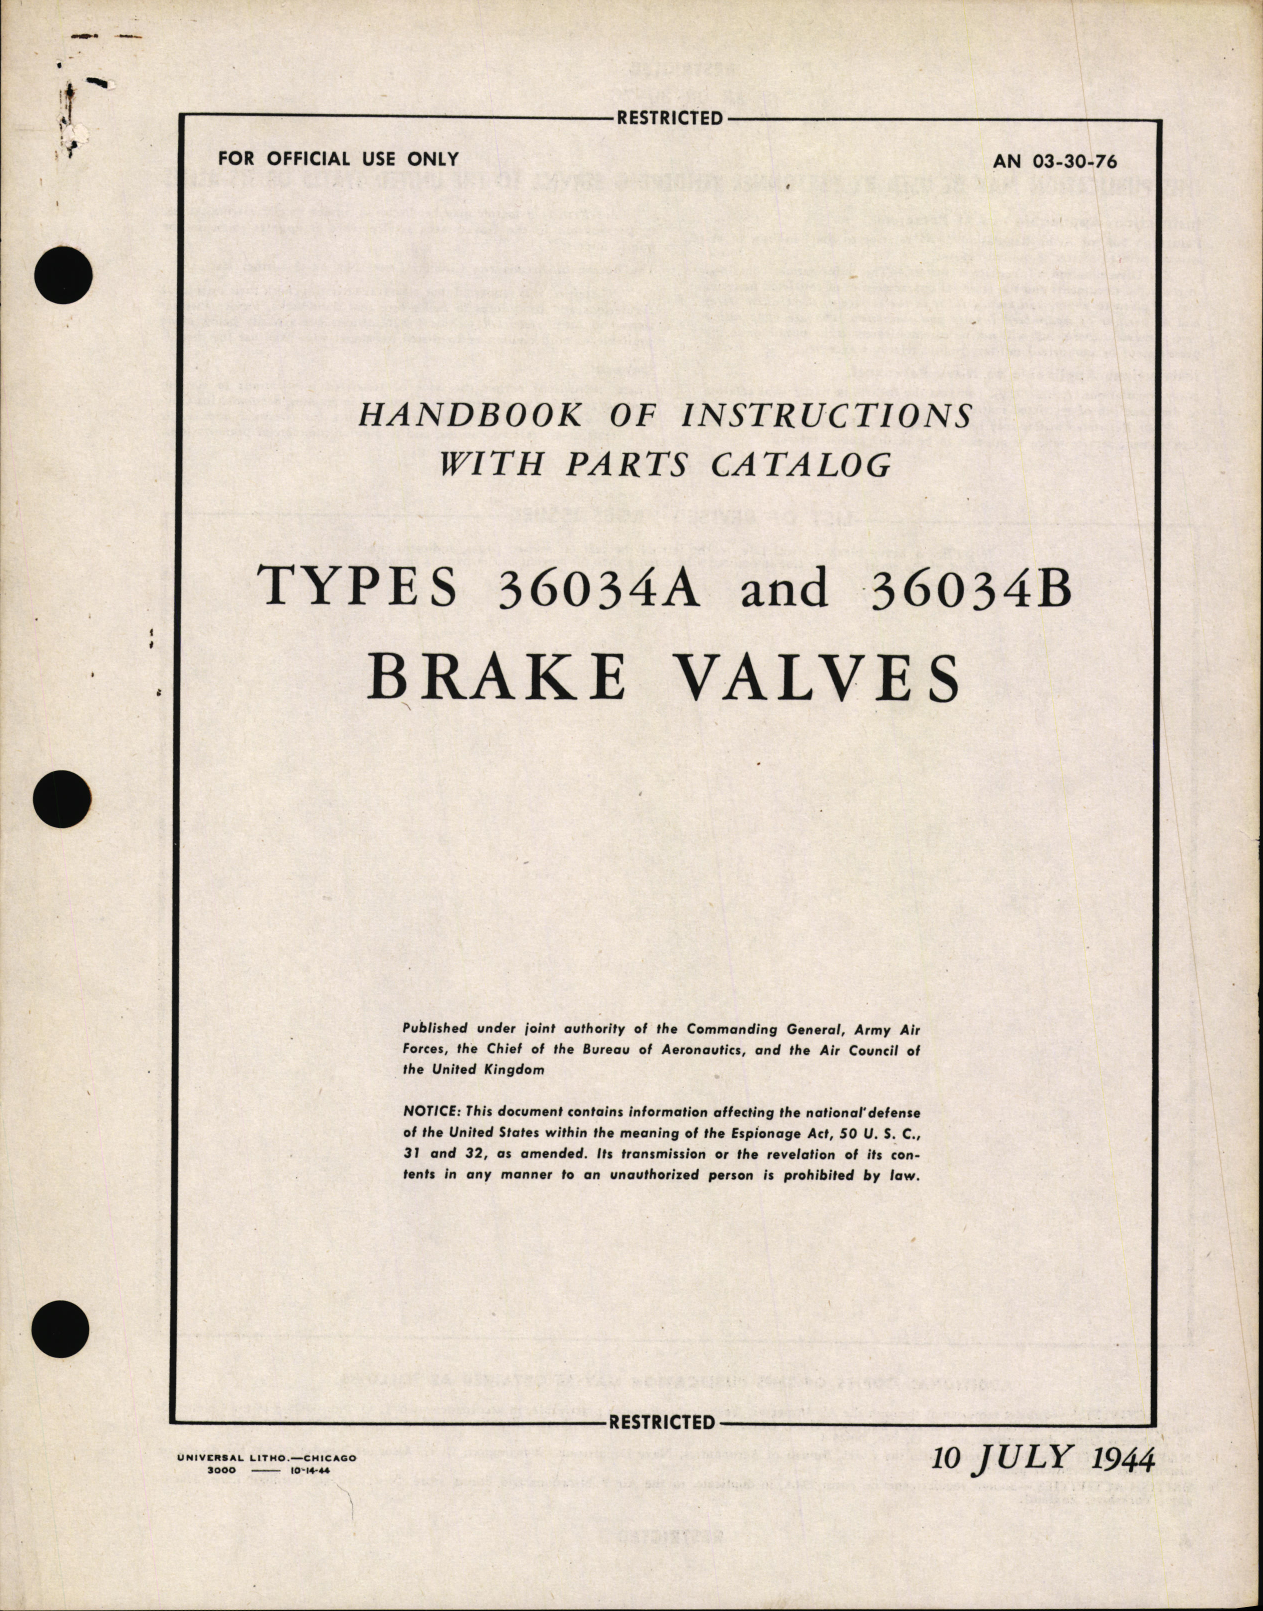 Sample page 1 from AirCorps Library document: Handbook of Instructions with Parts Catalog for Type 36034A and 36034B Brake Valves